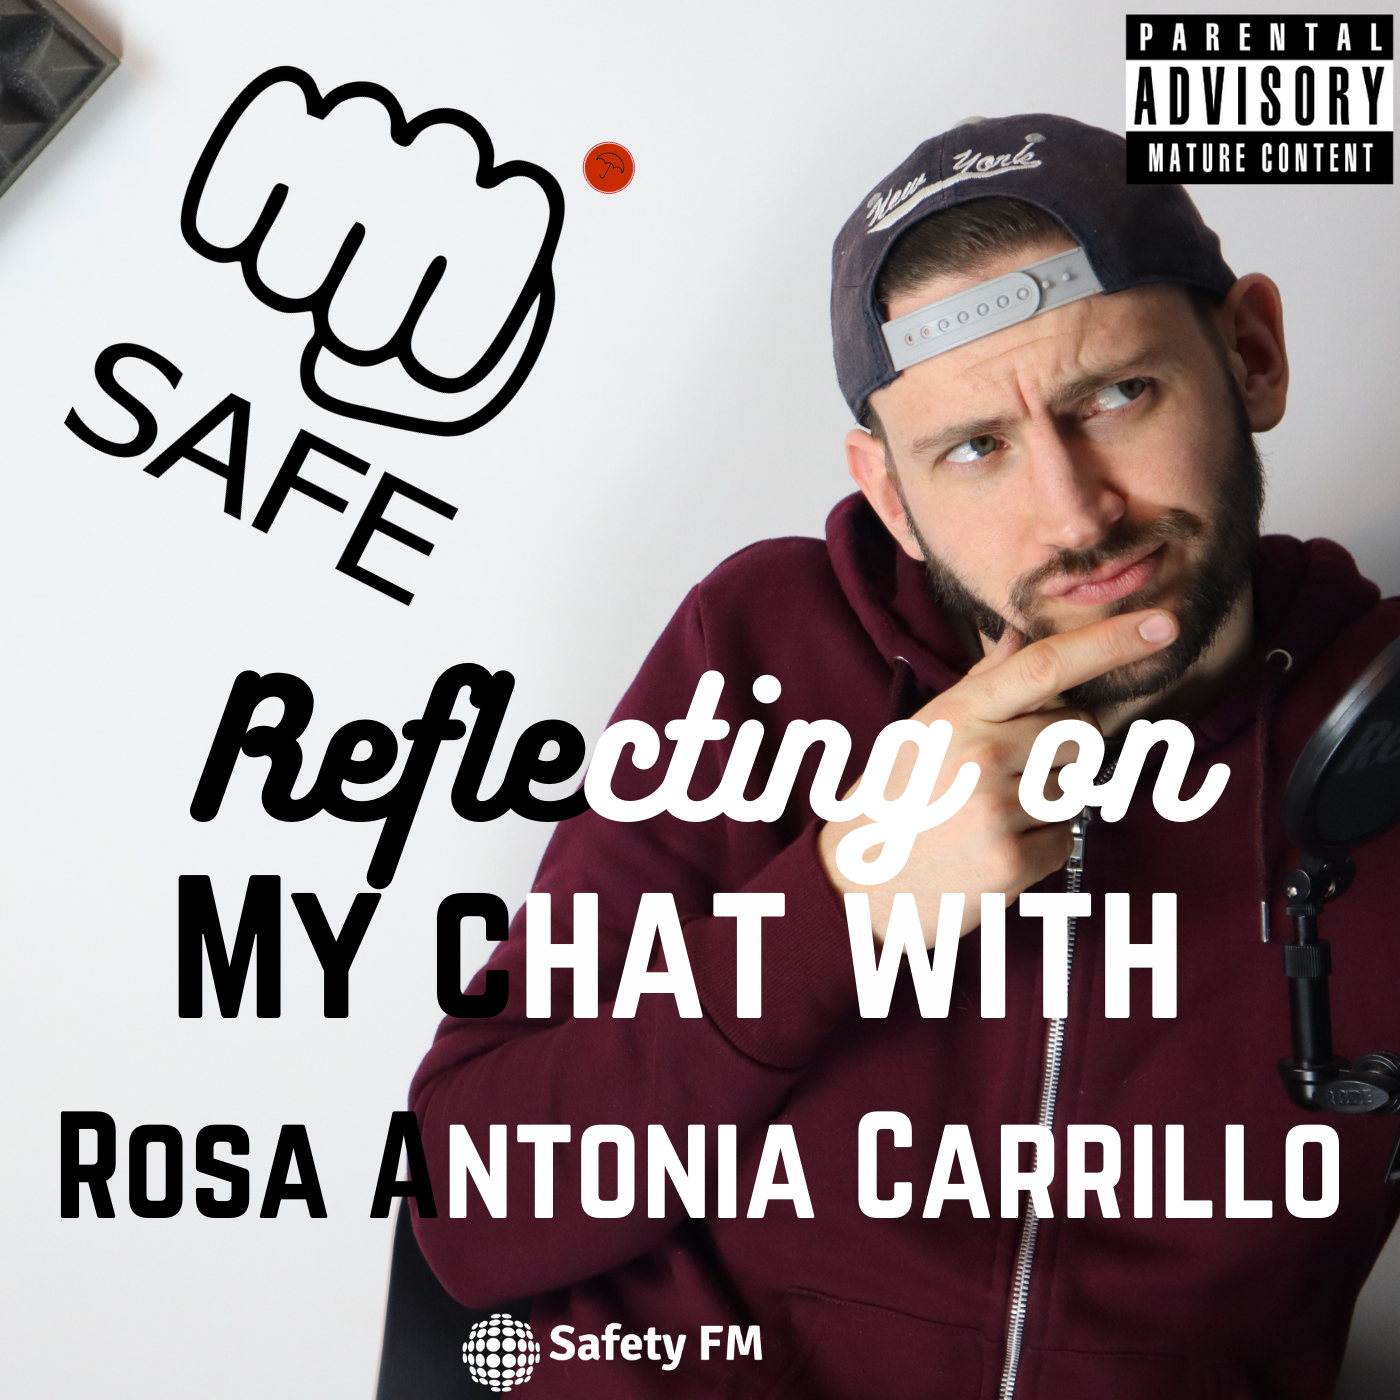 Reflecting on my chat with Rosa